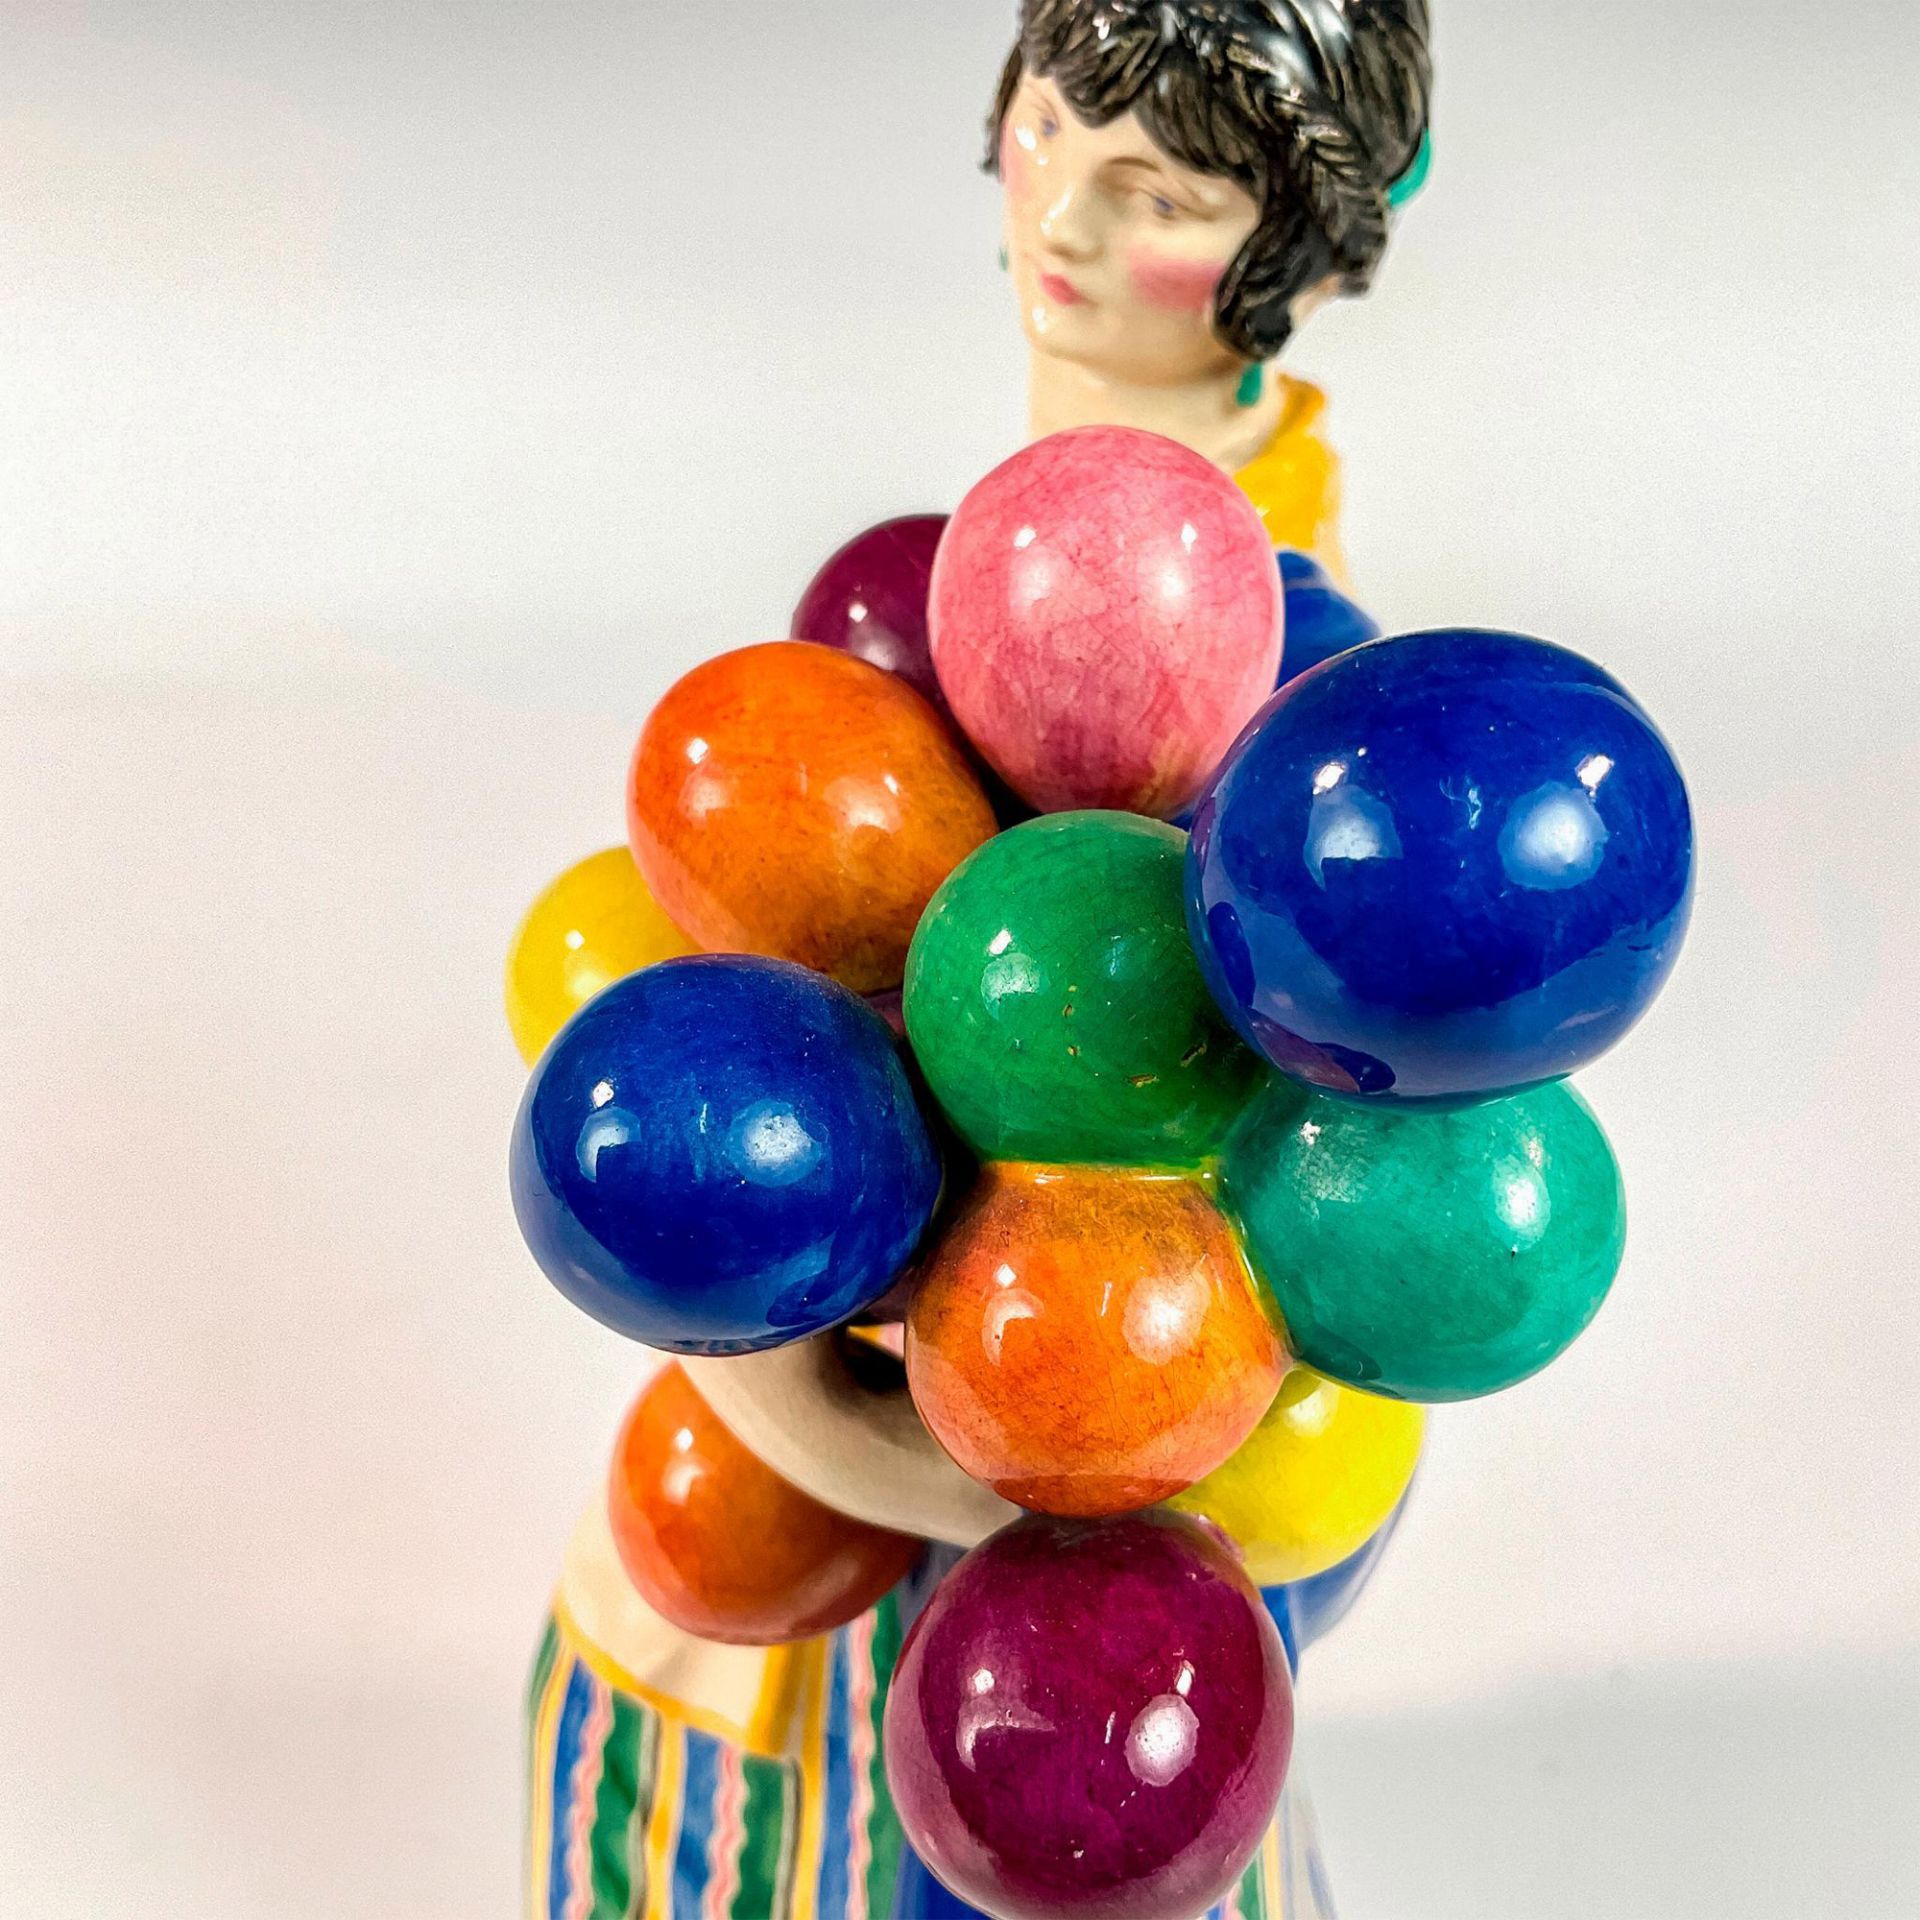 Charles Vyse Figure, The Balloon Woman - Image 2 of 4